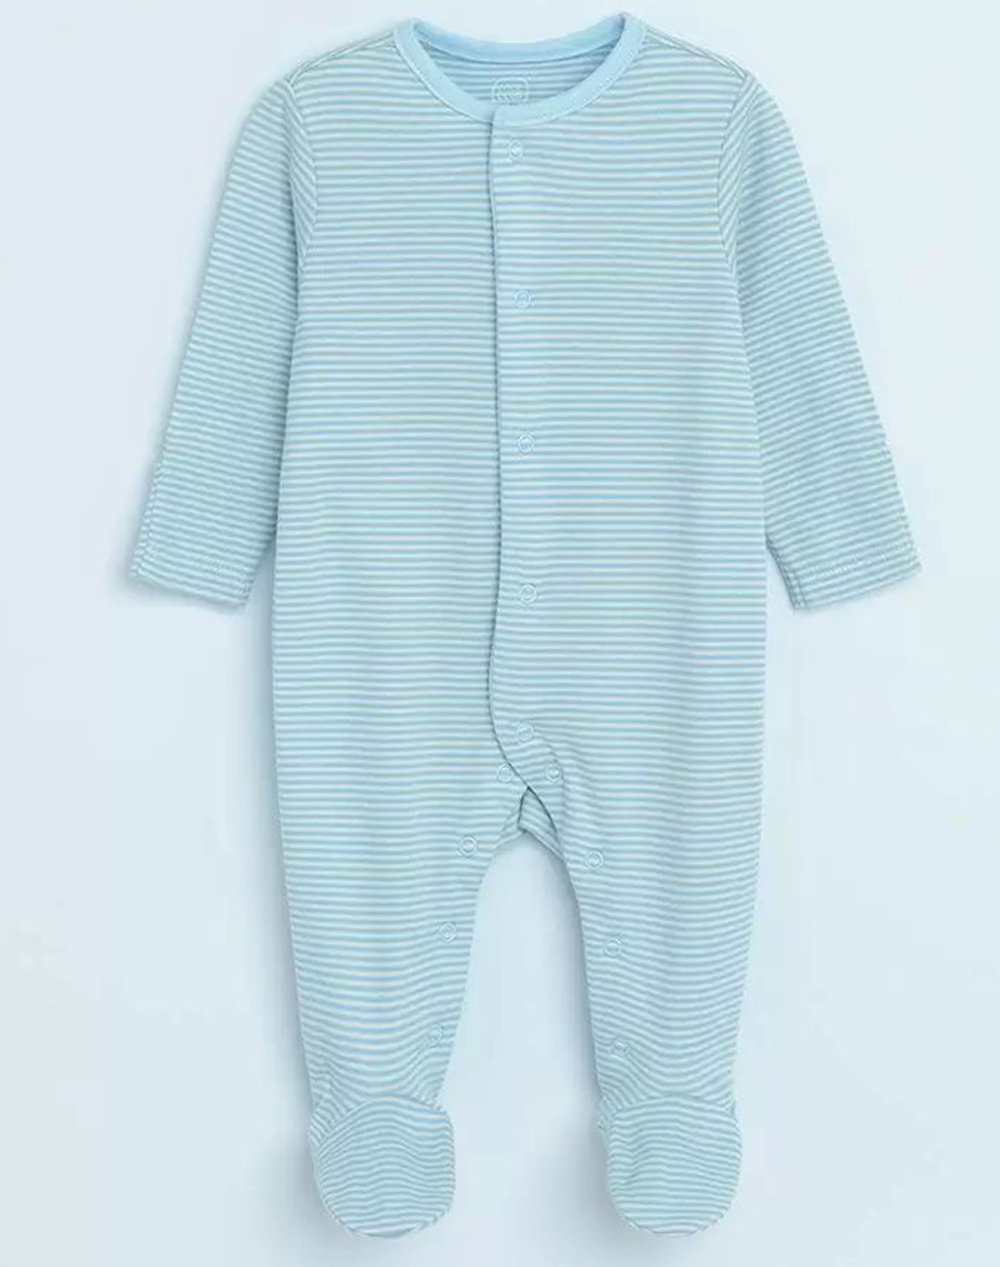 COOL CLUB Long-Sleeve Romper 2 Pieces for Boys